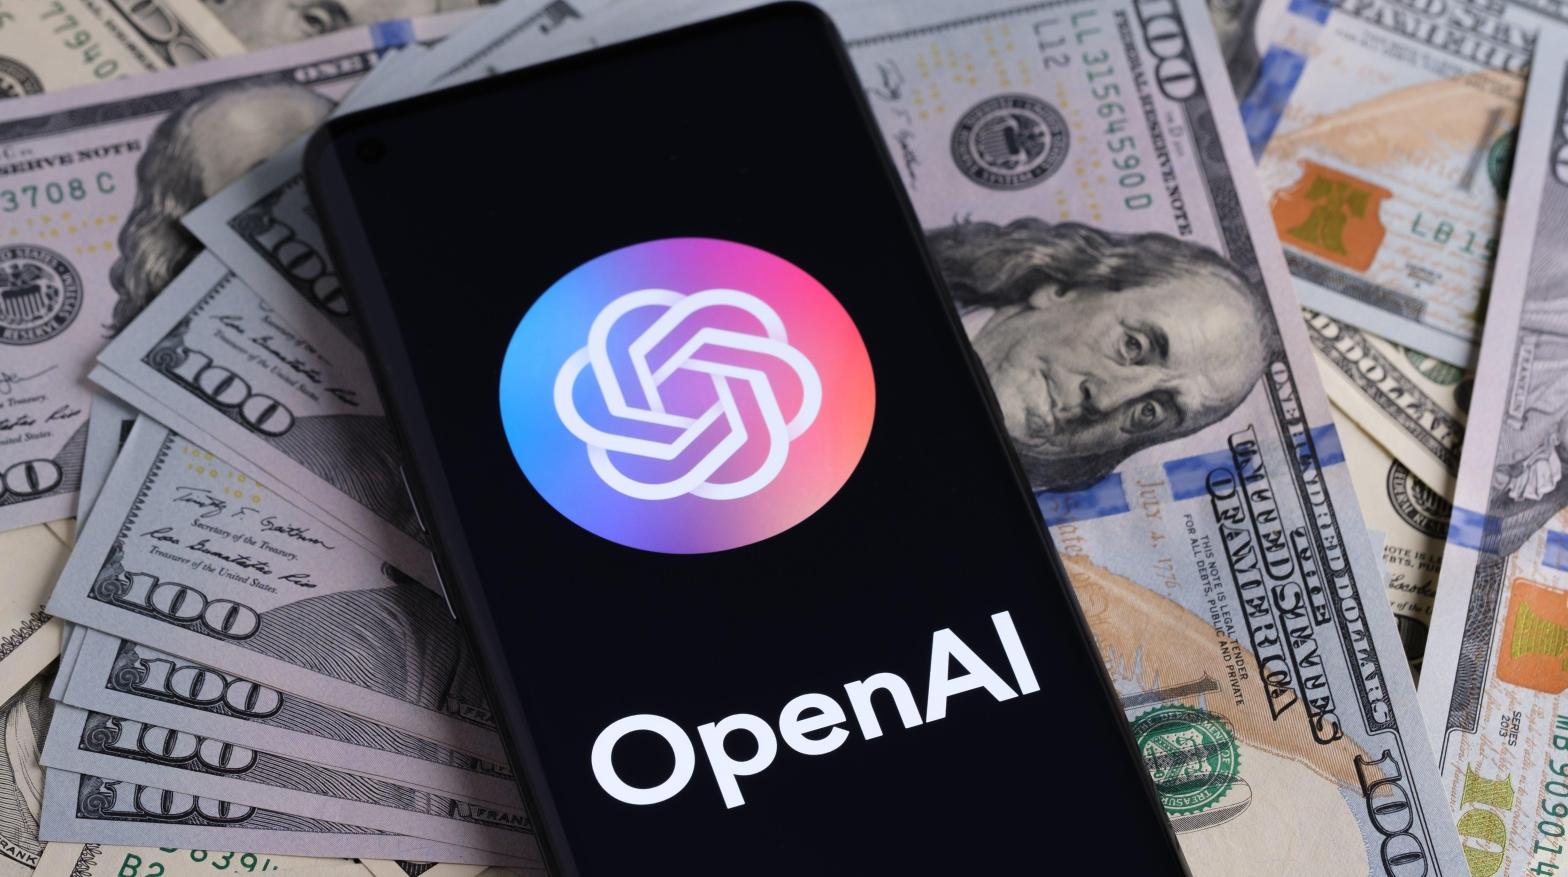 OpenAI has already leveraged the release of its GPT-4 AI for new integrations with apps like Duolingo and Khan Academy. (Photo: Ascannio, Shutterstock)